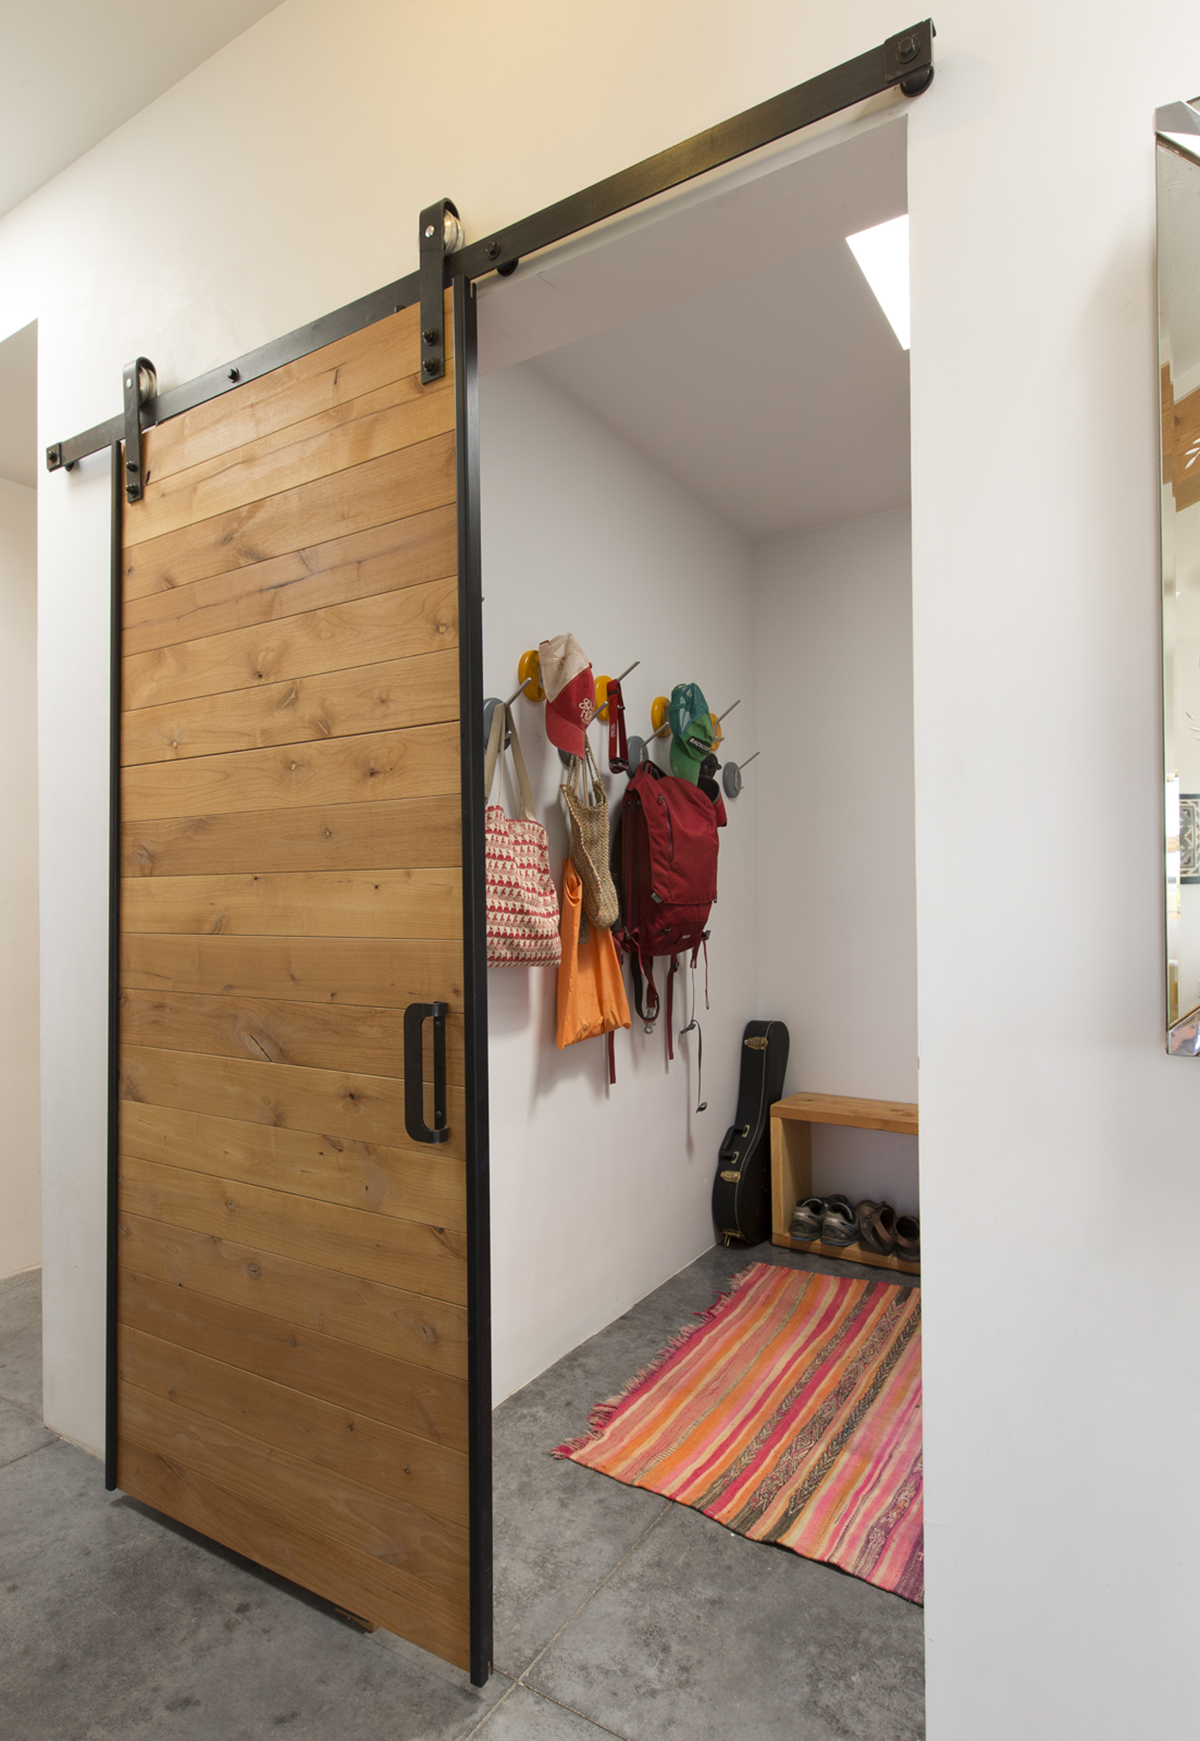 A sliding barn door in a room with a rug created by a home designer.